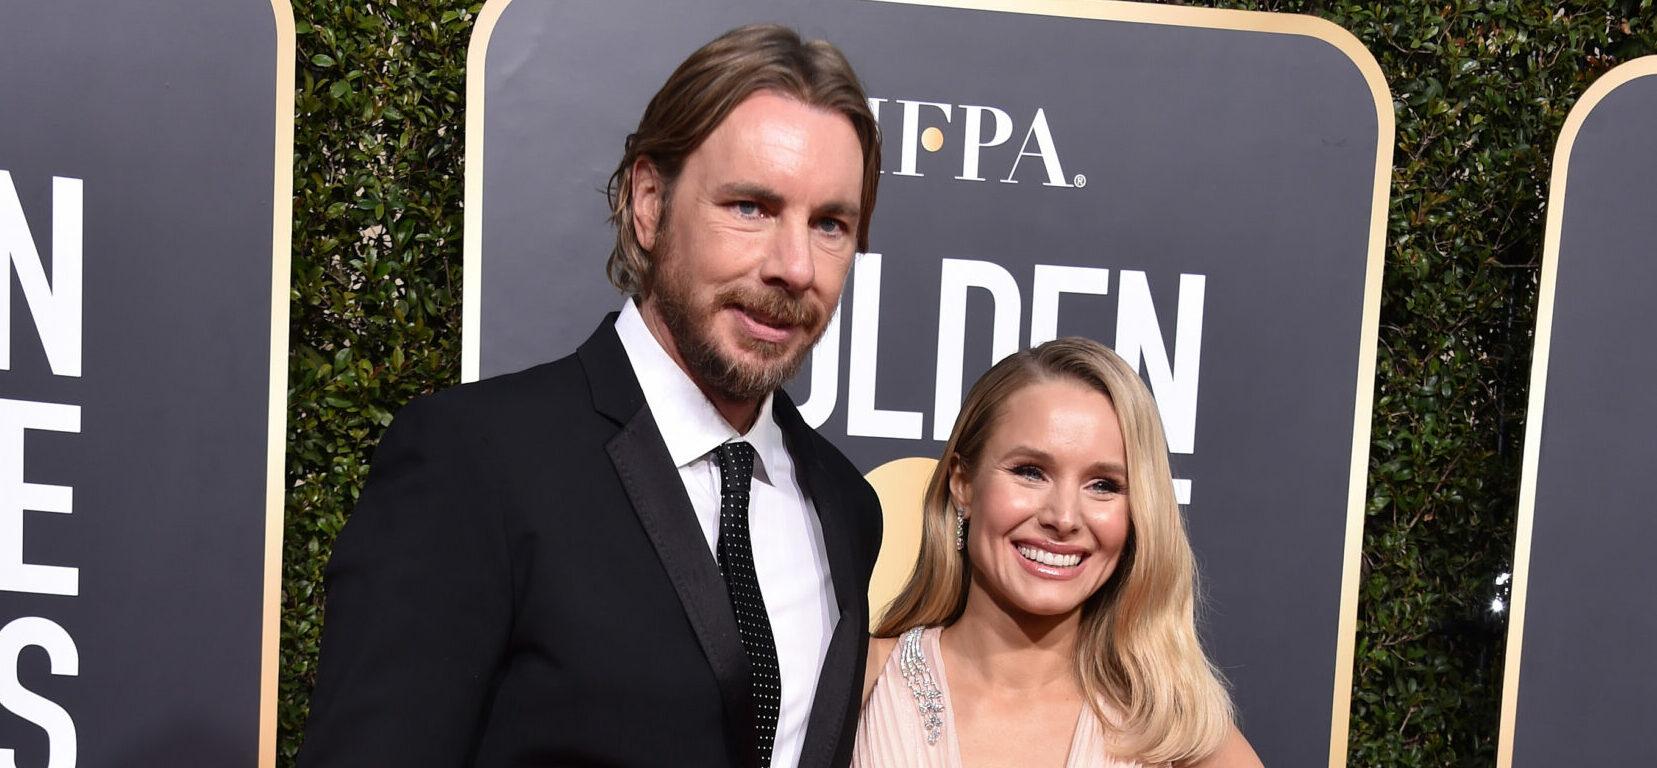 Dax Shepard and Kristen Bell smiling.